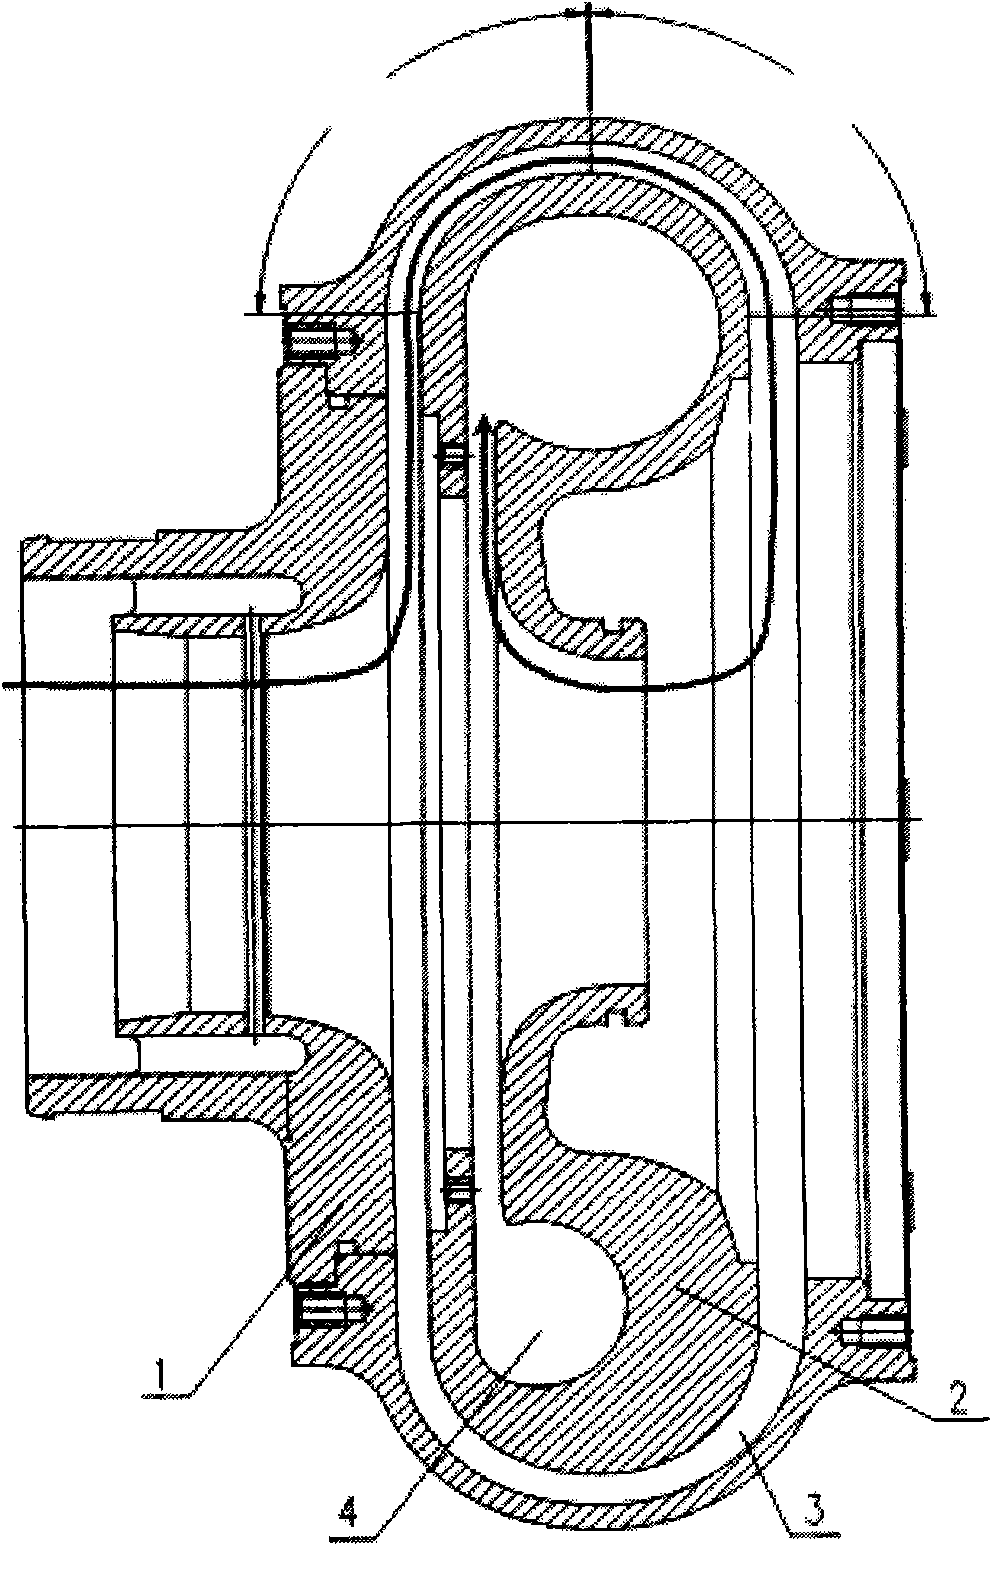 Double-layer volute structure of turbocharger compressor